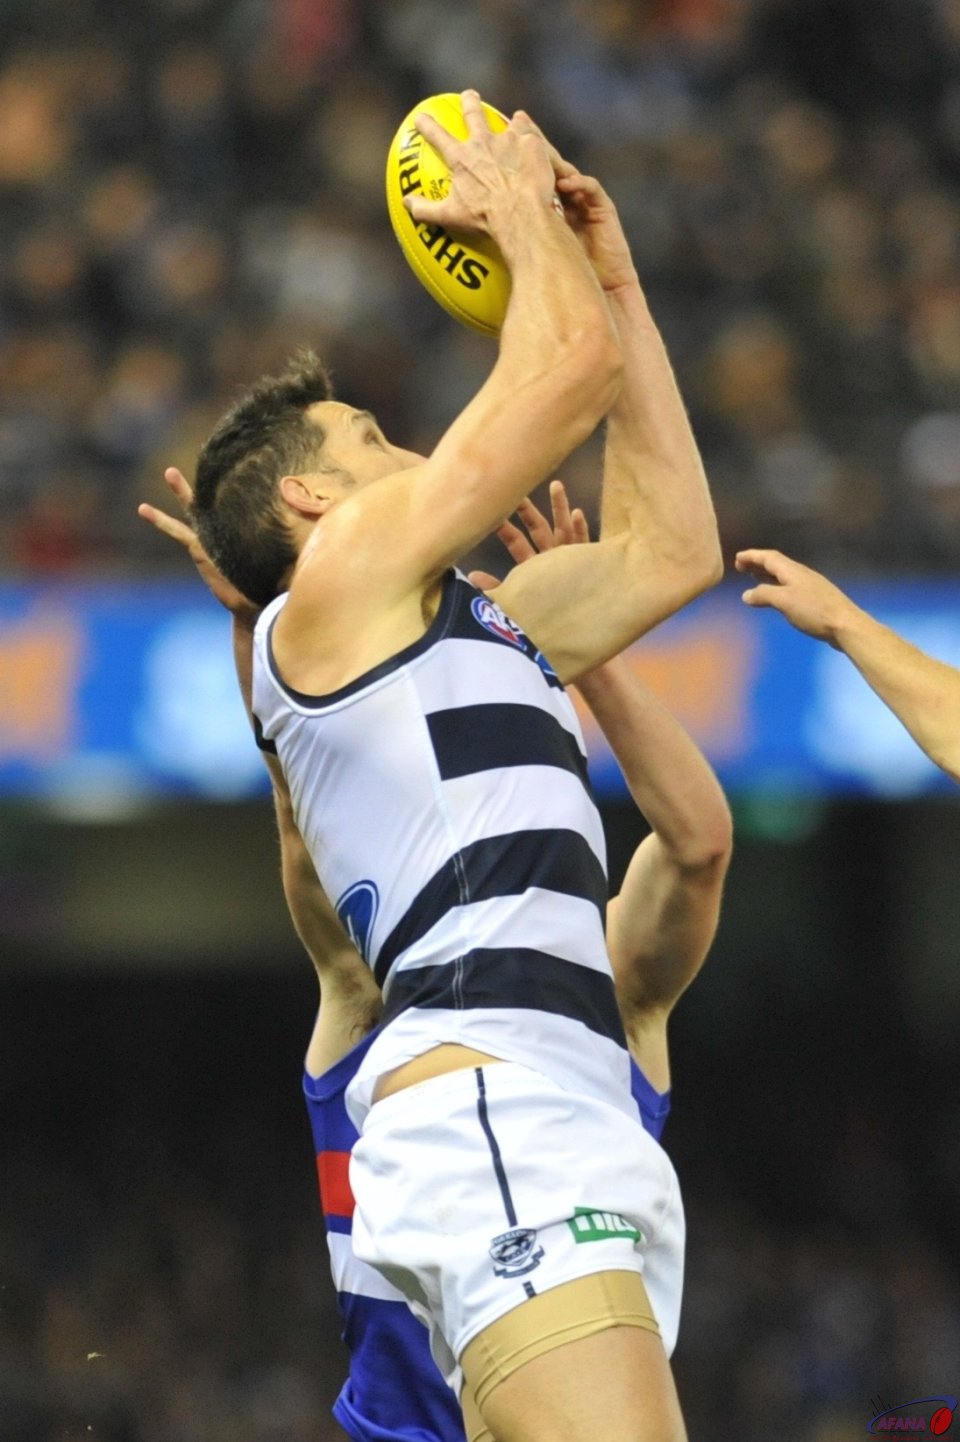 Harry Taylor outjumps the Bulldogs player to take a strong contested grab